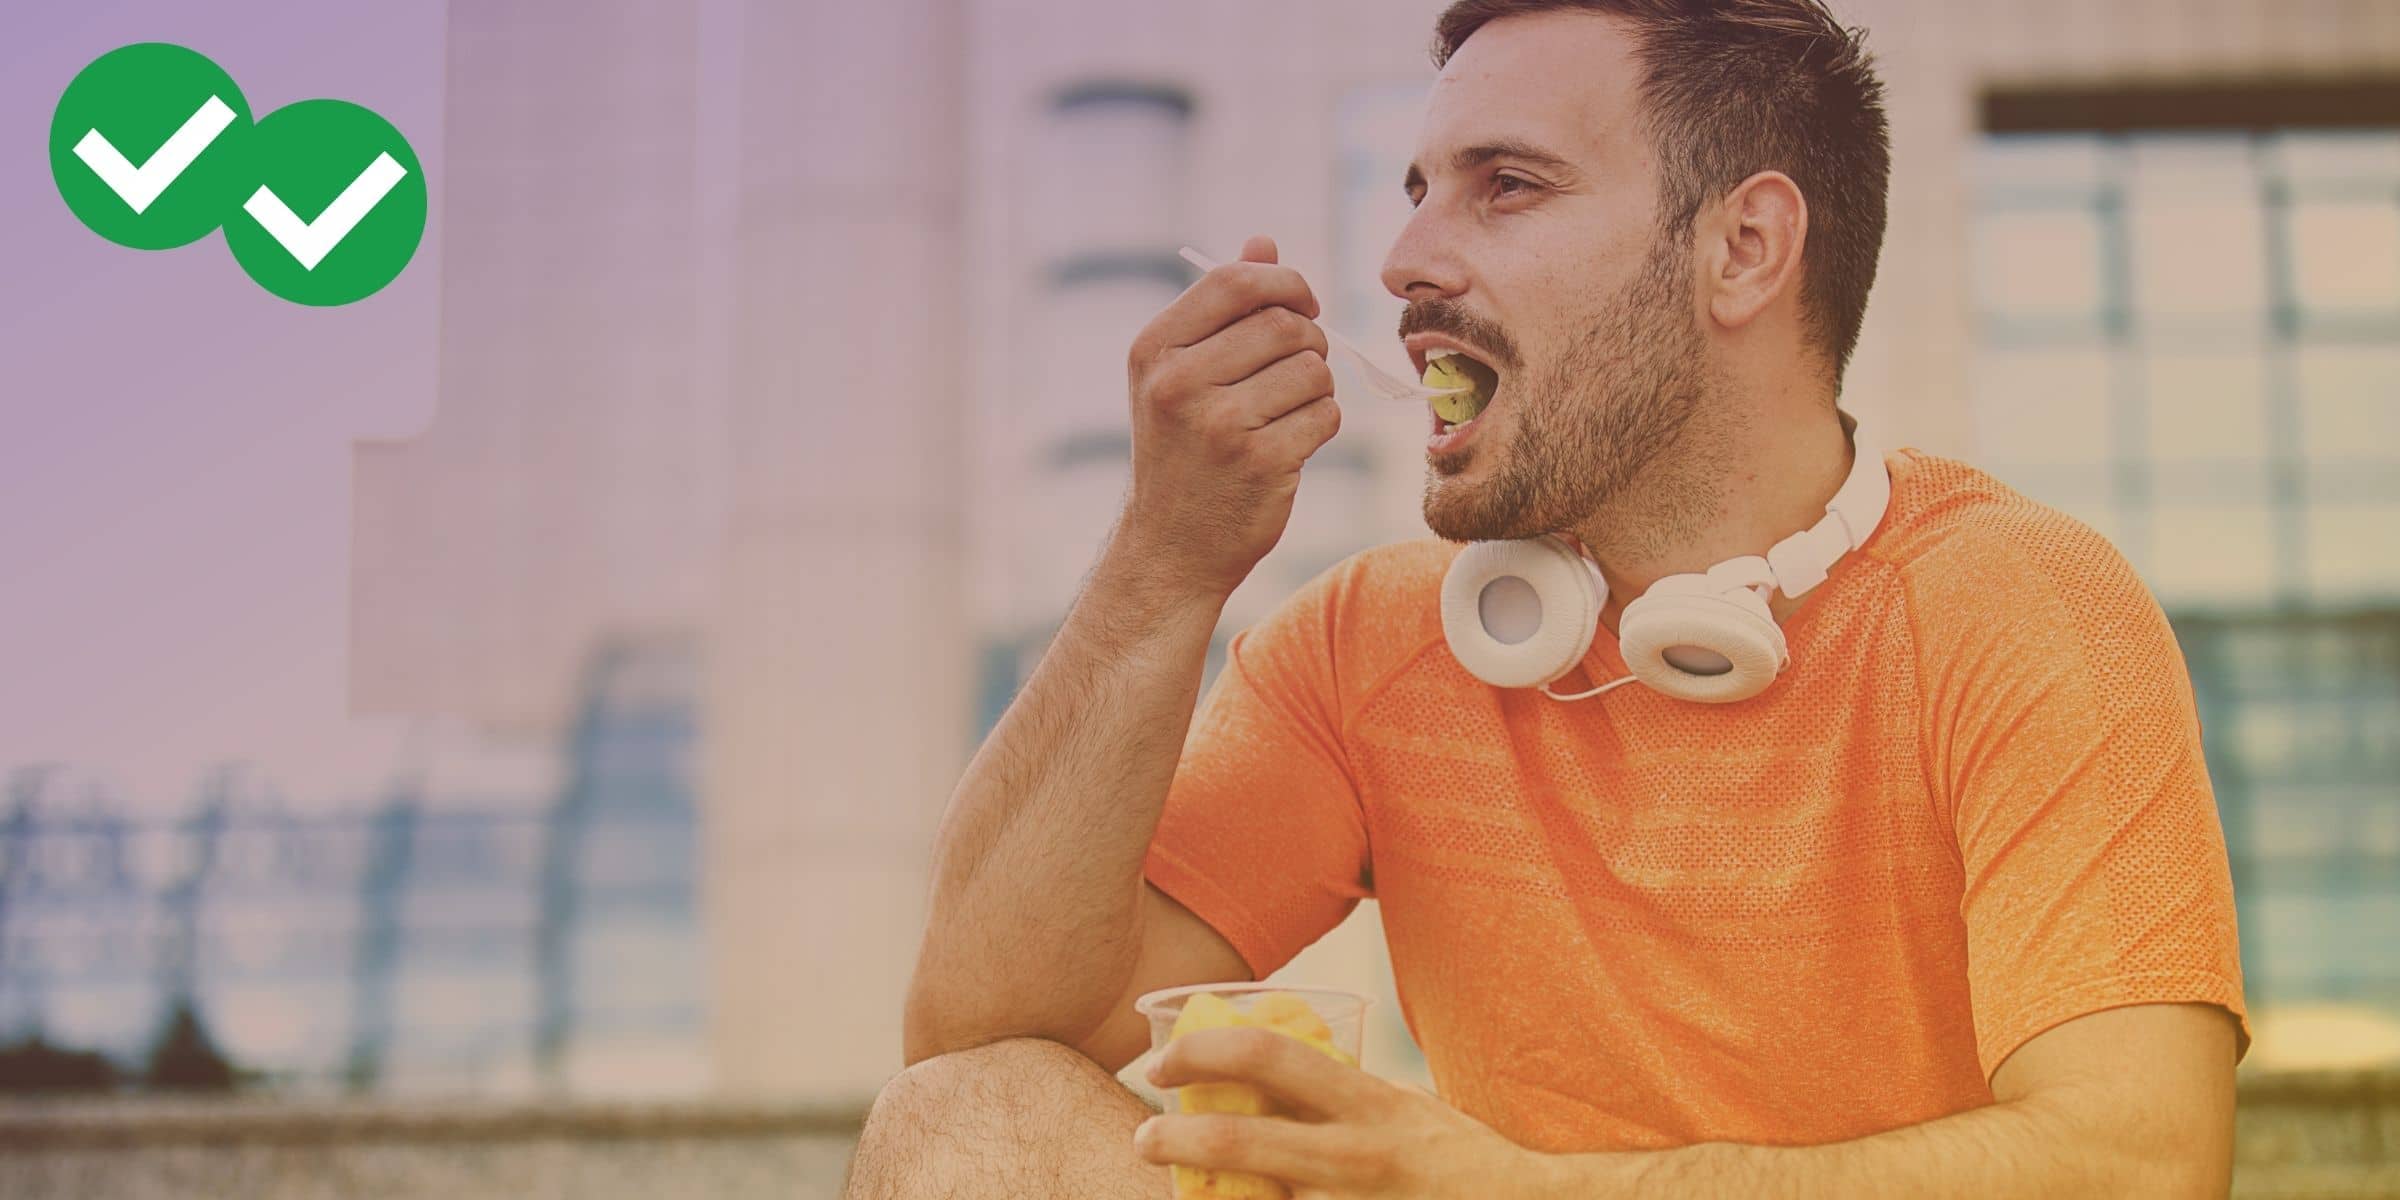 Man eating fruit after exercising to represent MCAT citric acid cycle - image by Magoosh